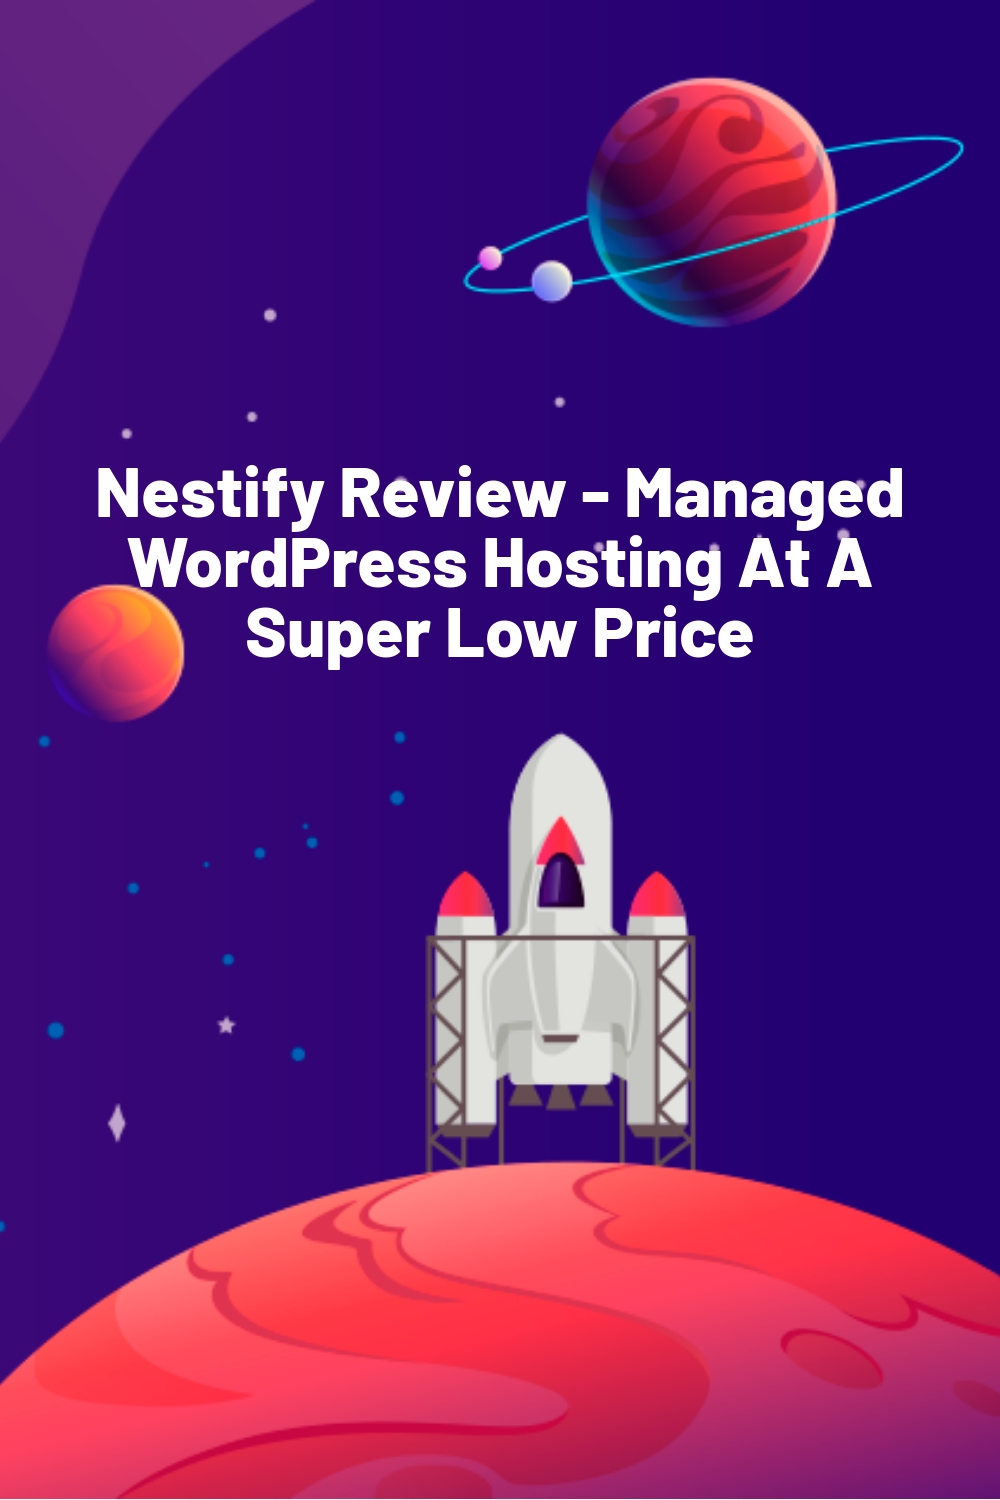 Nestify Review – Managed WordPress Hosting At A Super Low Price